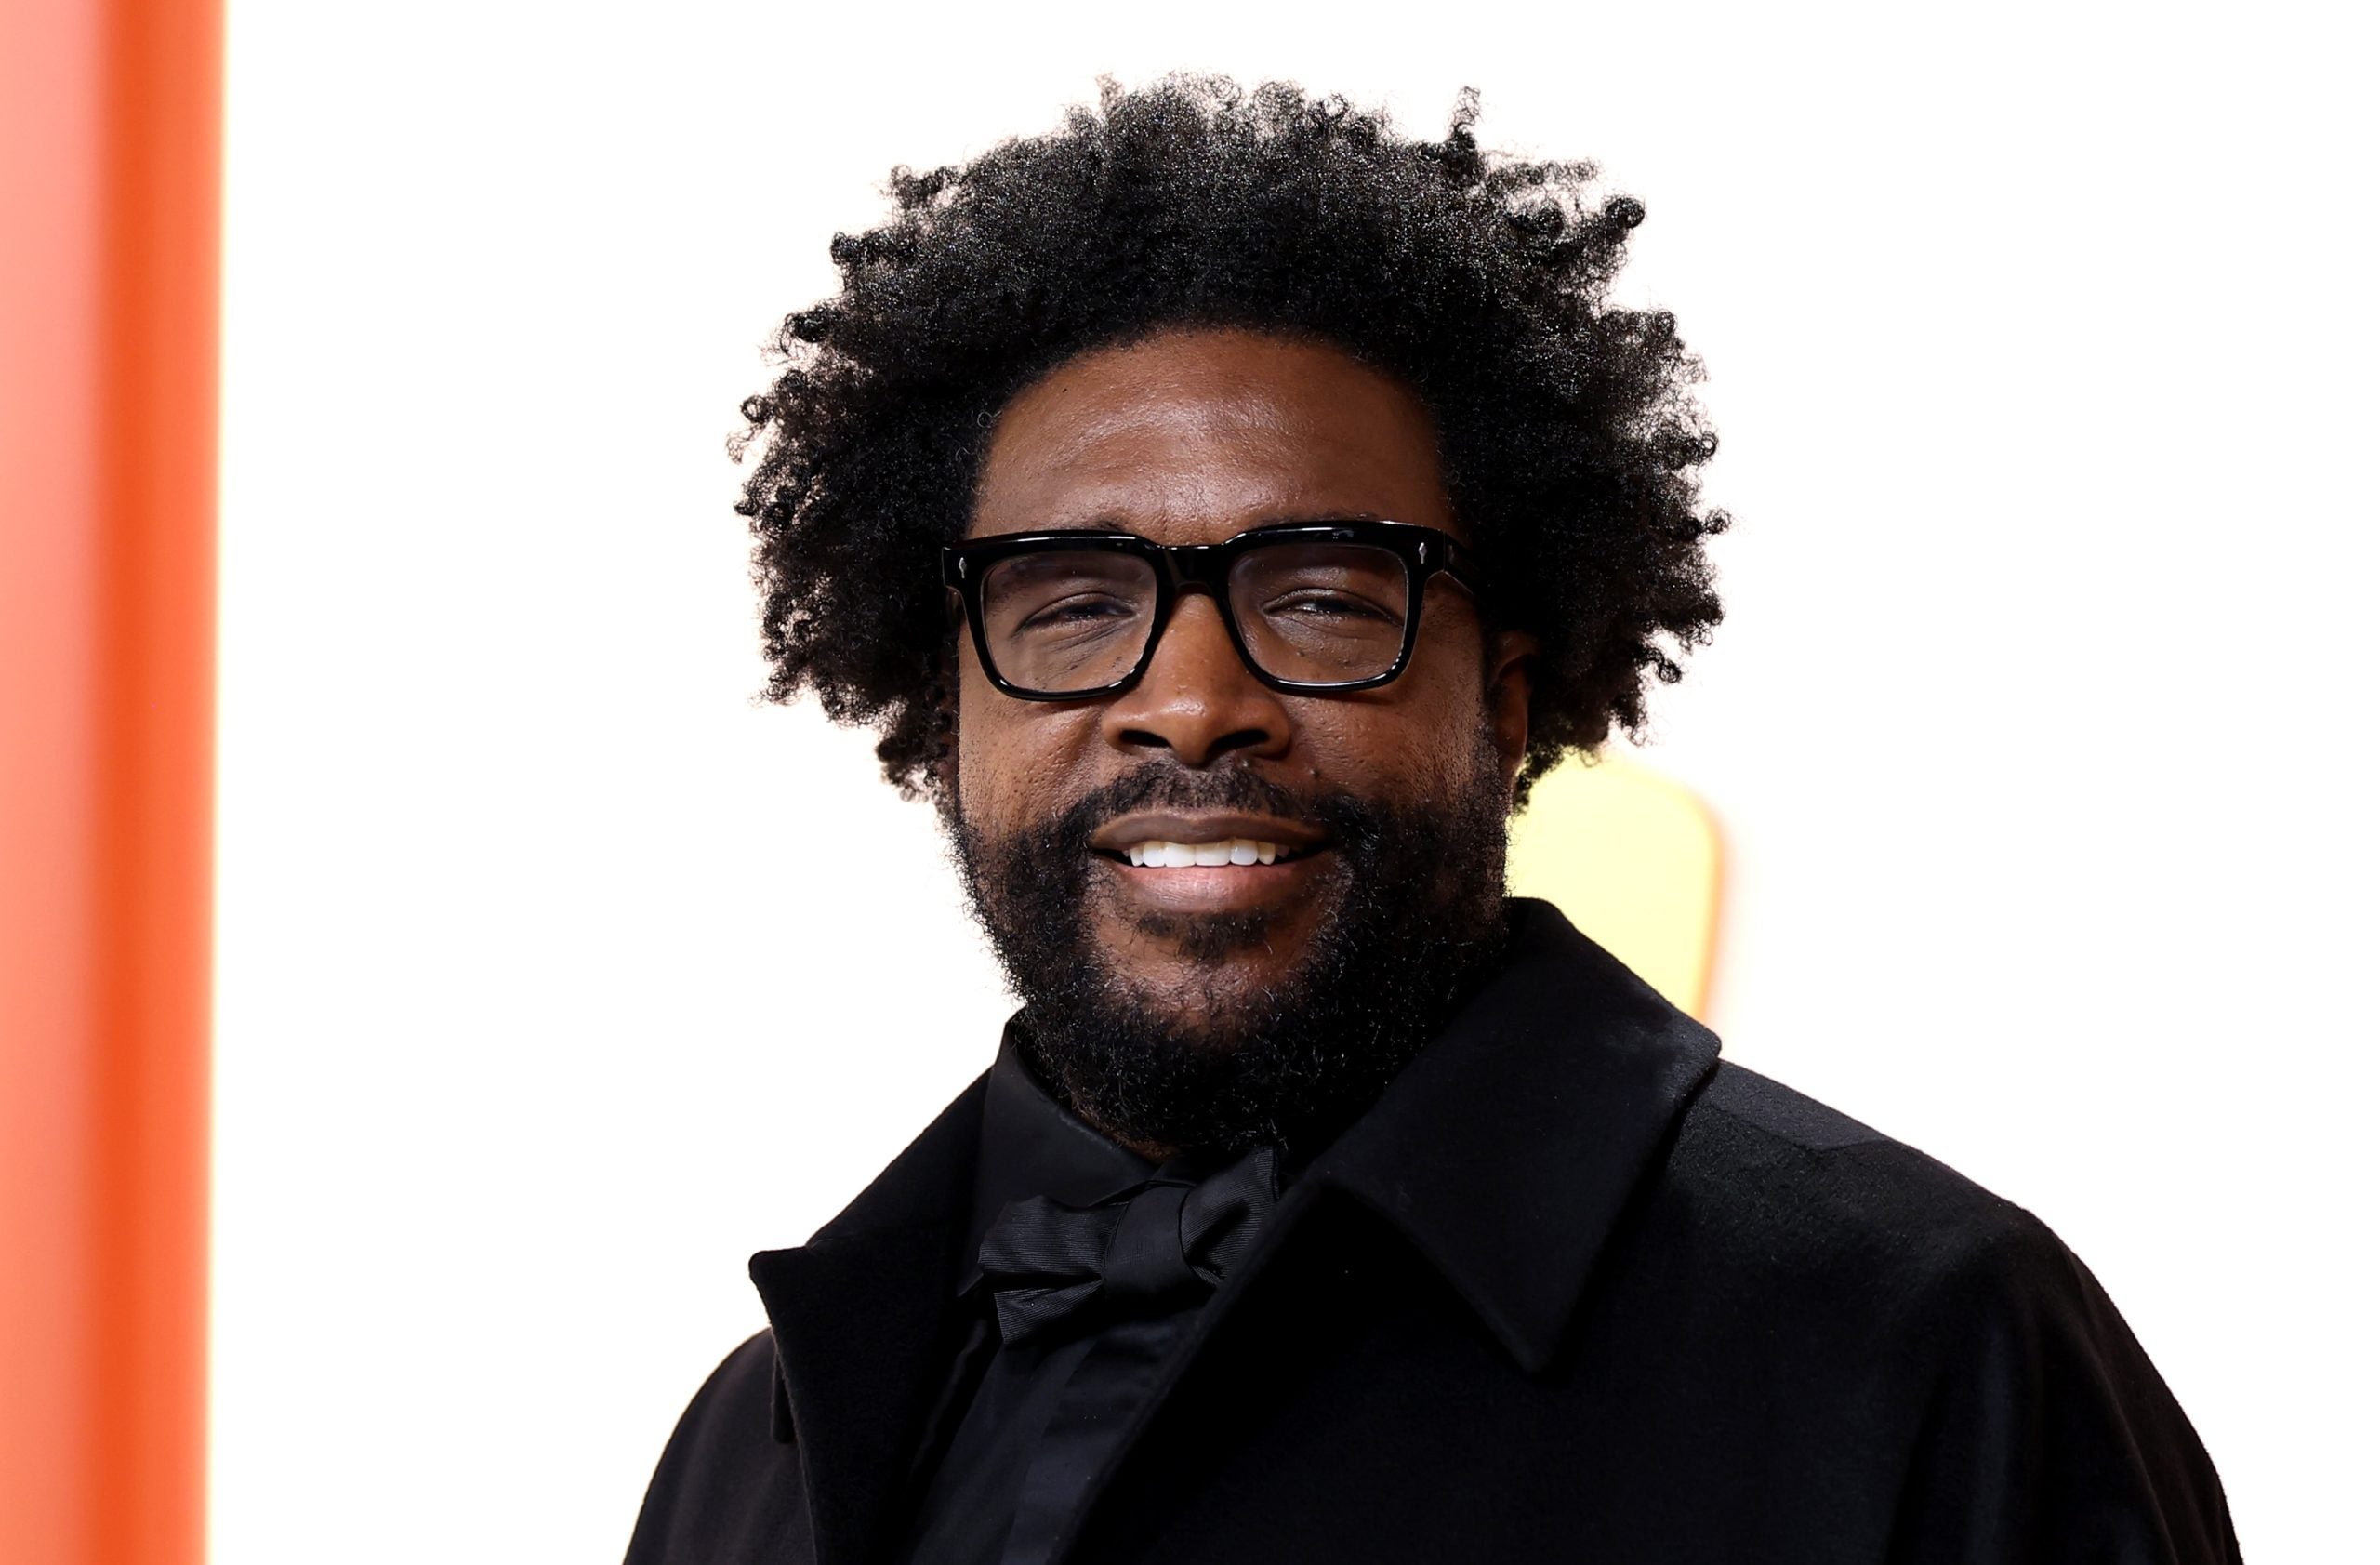 Questlove Releases First Young Adult Novel Under His Publishing Imprint—The Work Is Dedicated to "Black Nerds" 